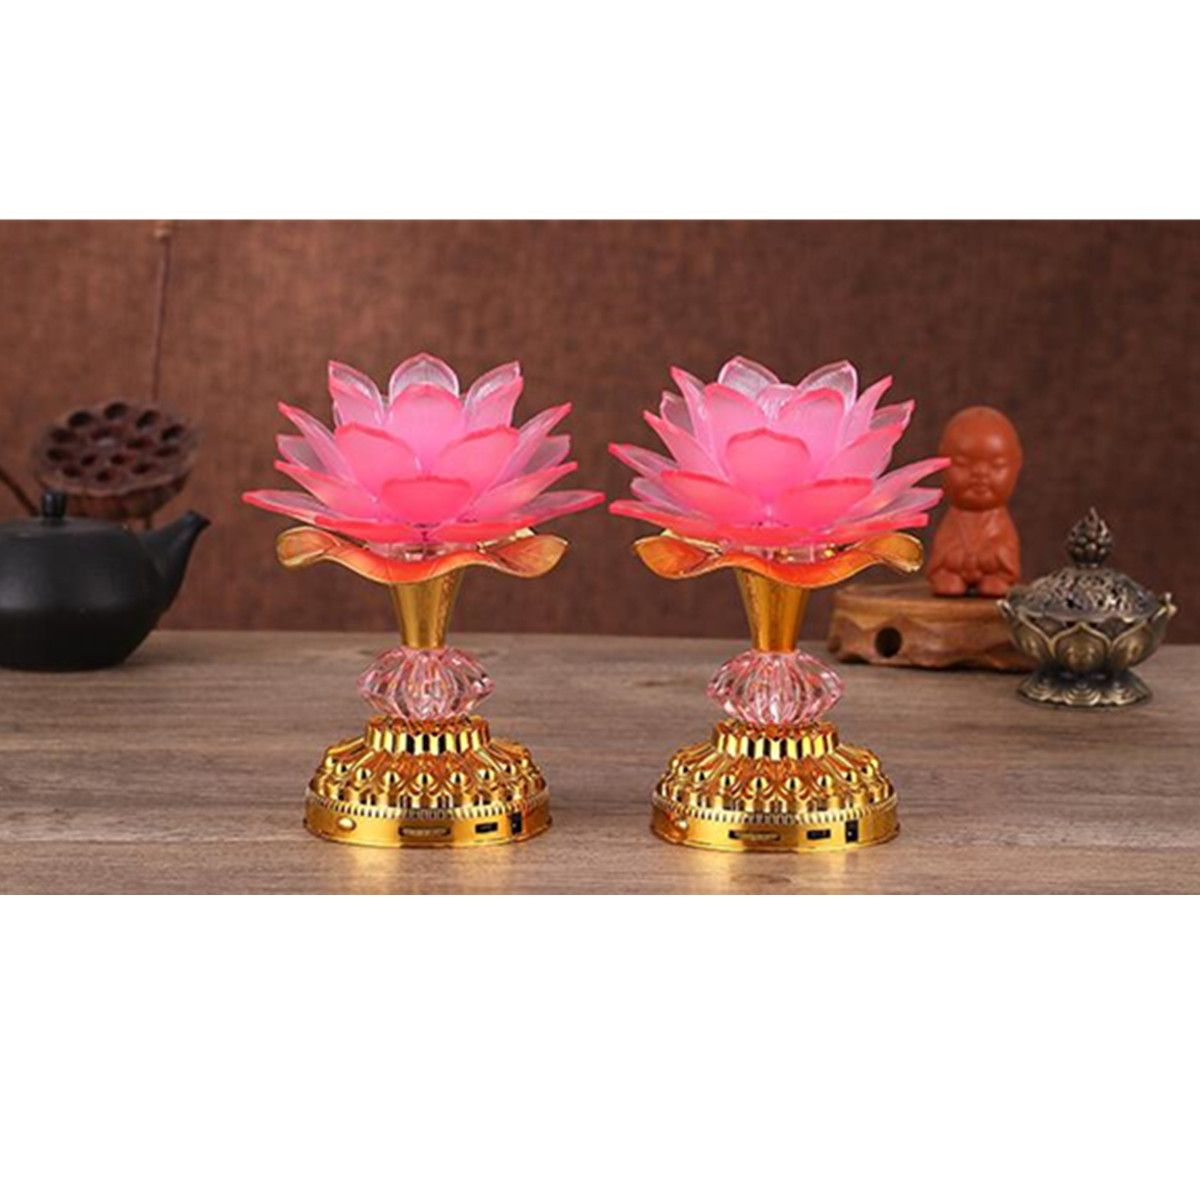 52-Buddhist-Songs-Buddhist-Prayer-Lamp-with-Colorful-LED-Lotus-Music-Light-Gift-Decorations-1494854